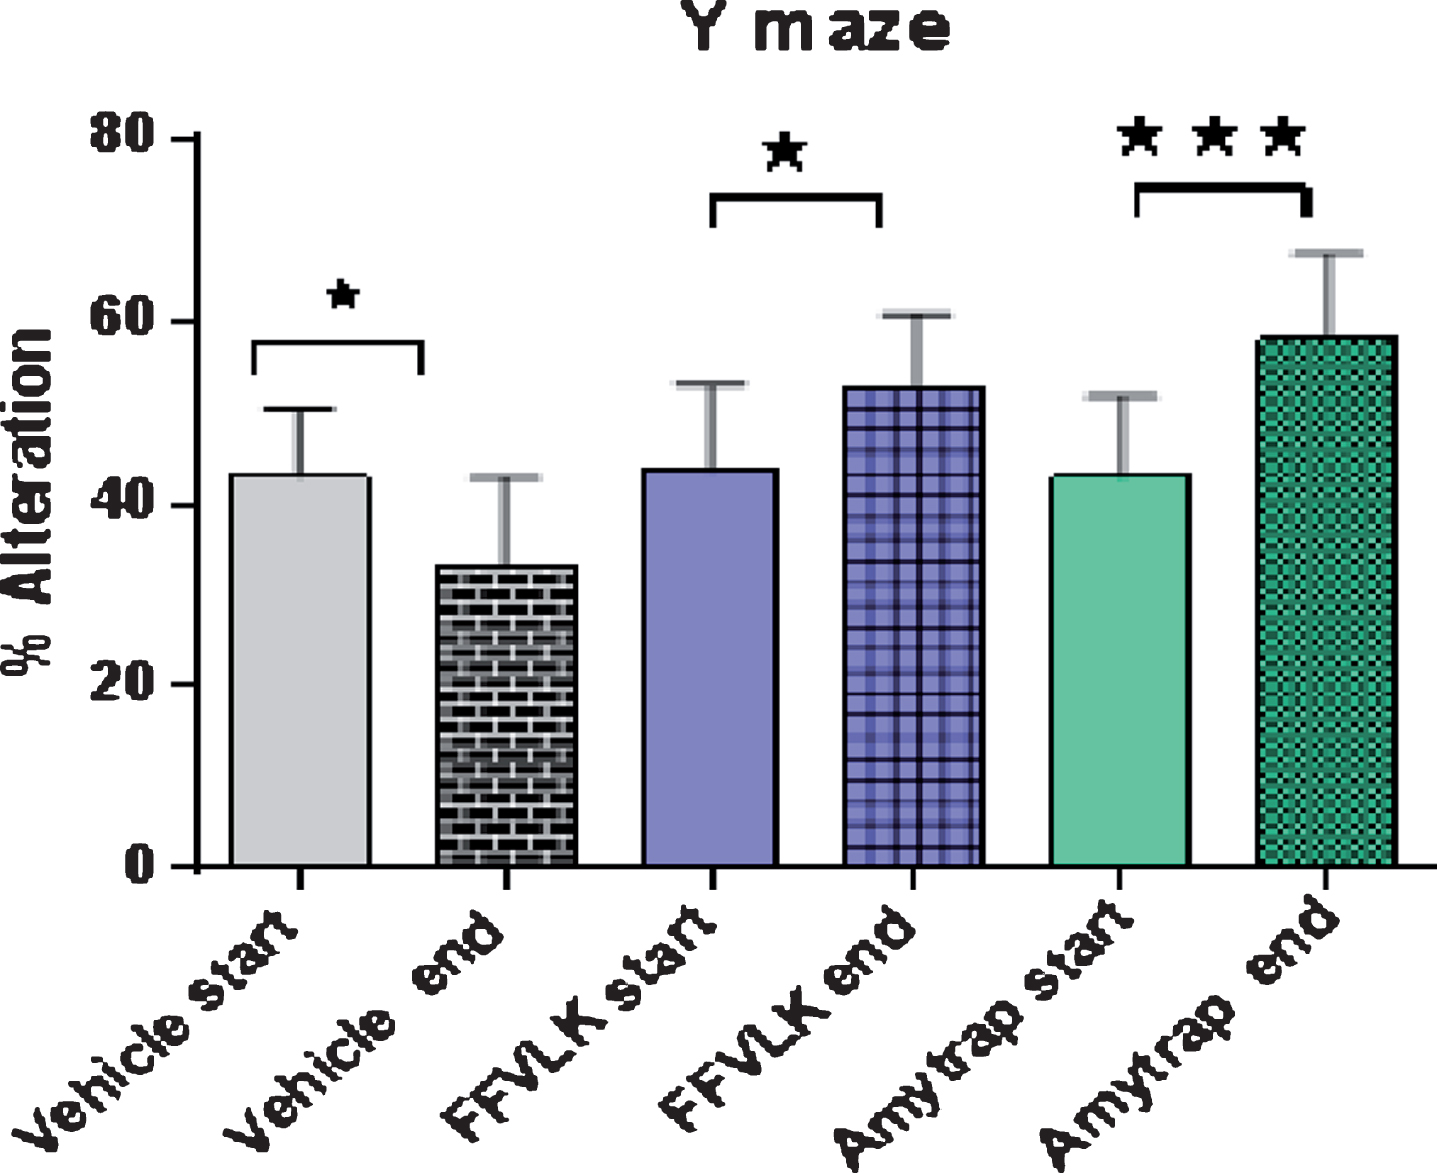 Y-maze % alternation in 5-month-old AD model mice. Changes in percent alteration in Y maze task performed by 5-month-old mice following treatment with vehicle, FFVLK or Amytrap at 100 μg monthly for 5 months. Start and End in the figure equate to Before treatment and After treatment, respectively. Values are expressed as Mean±SD (n = 12). *p < 0.05, ***p < 0.001.